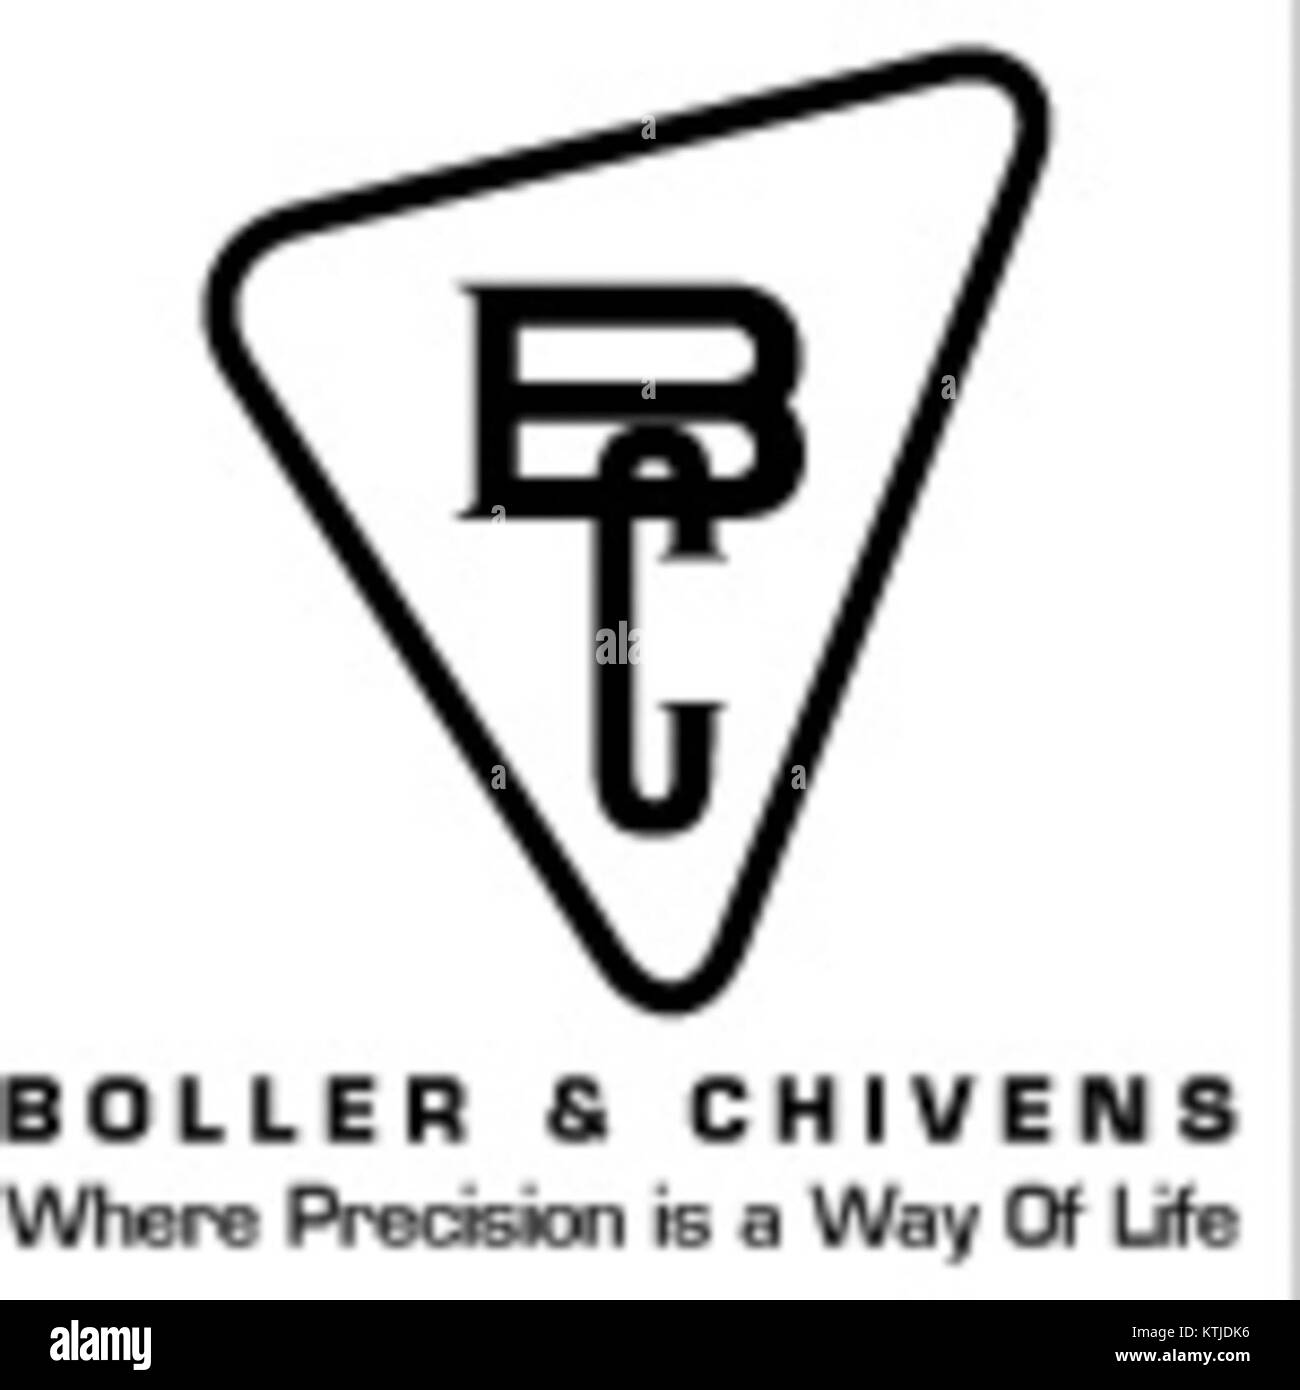 Boller and Chivens logo Stock Photo